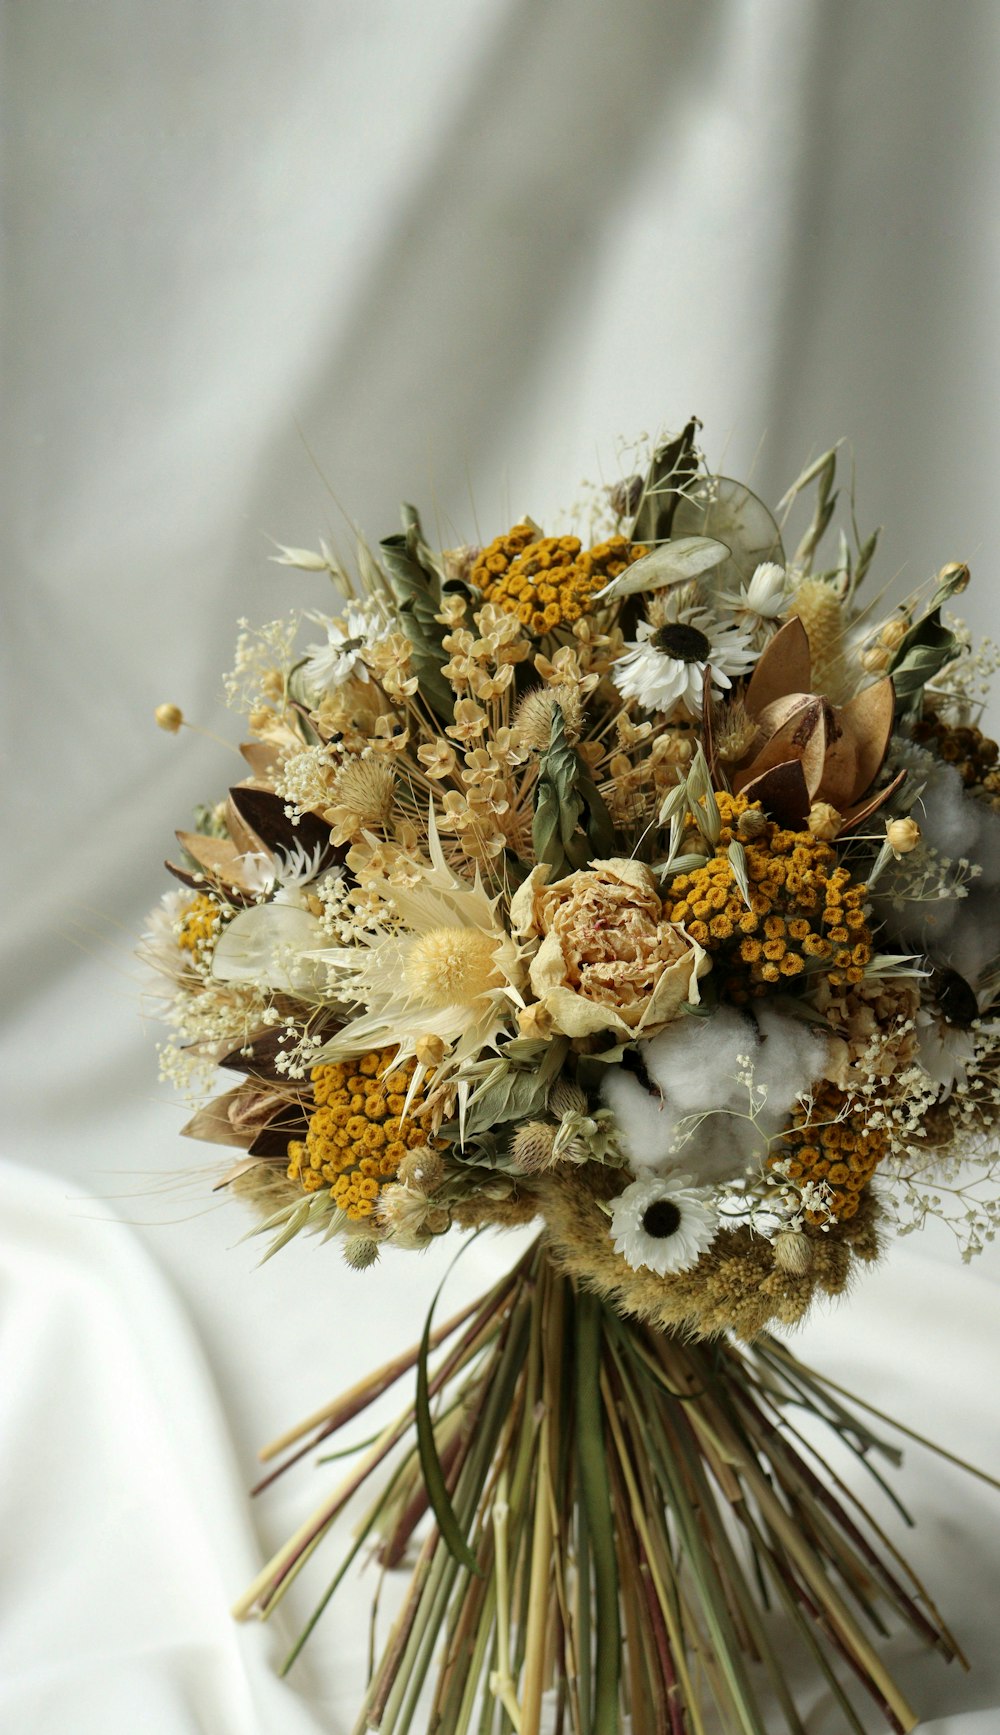 a bouquet of dried flowers on a white cloth